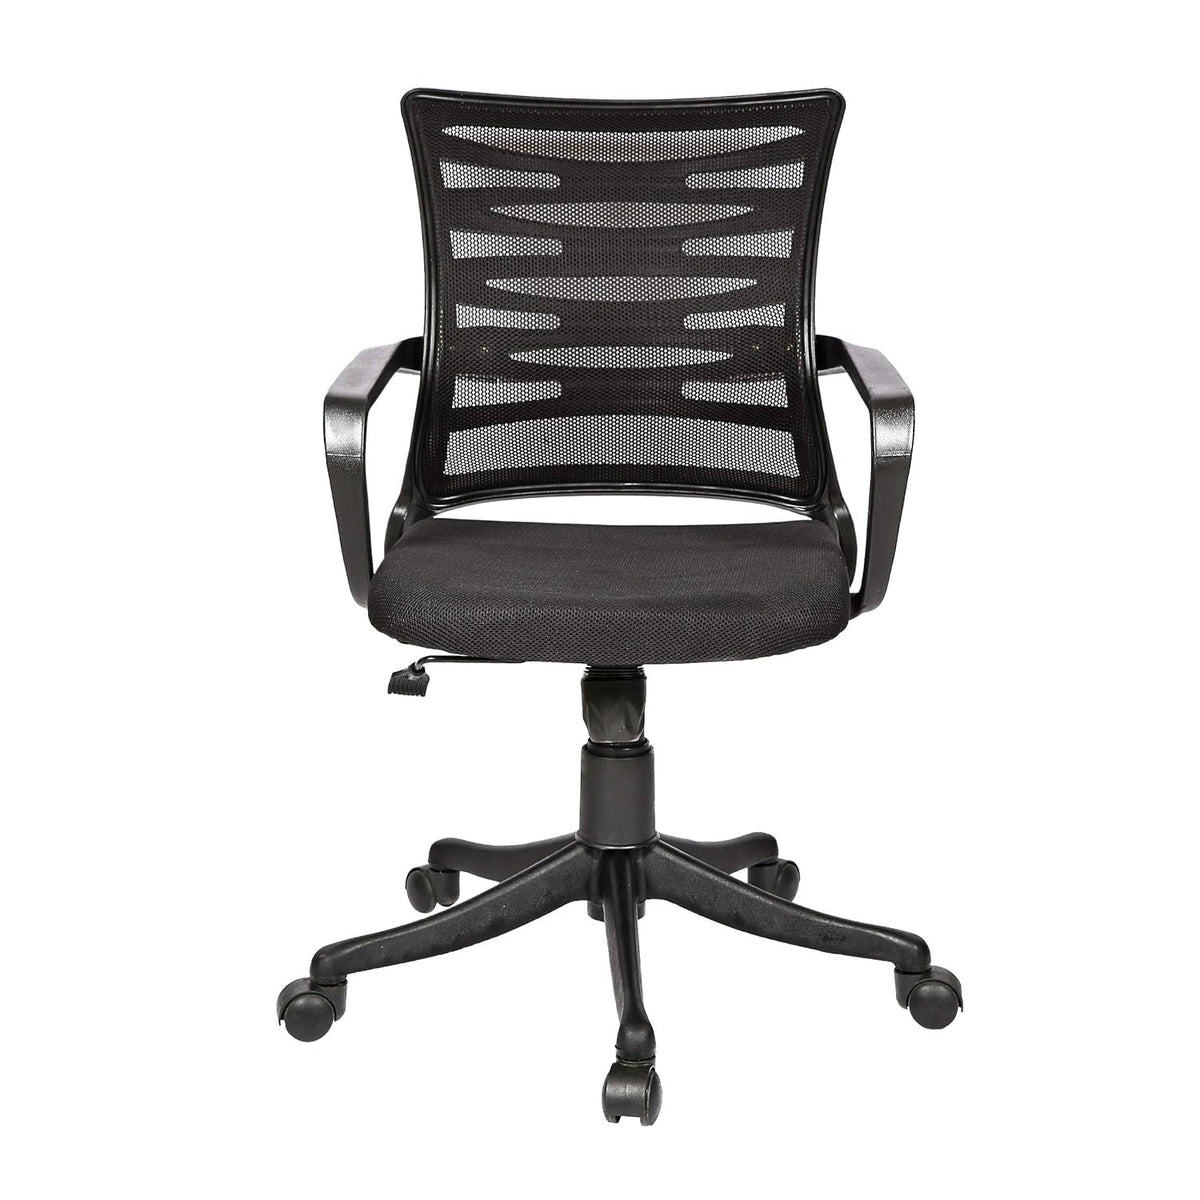 SmileSellers Zig Zag Mesh Mid-Back Ergonomic Desk Office Chair with Tilting Mechanism, Comfortable Seat, and Revolving Heavy Duty Metal Base | Ideal for Work from Home & Study